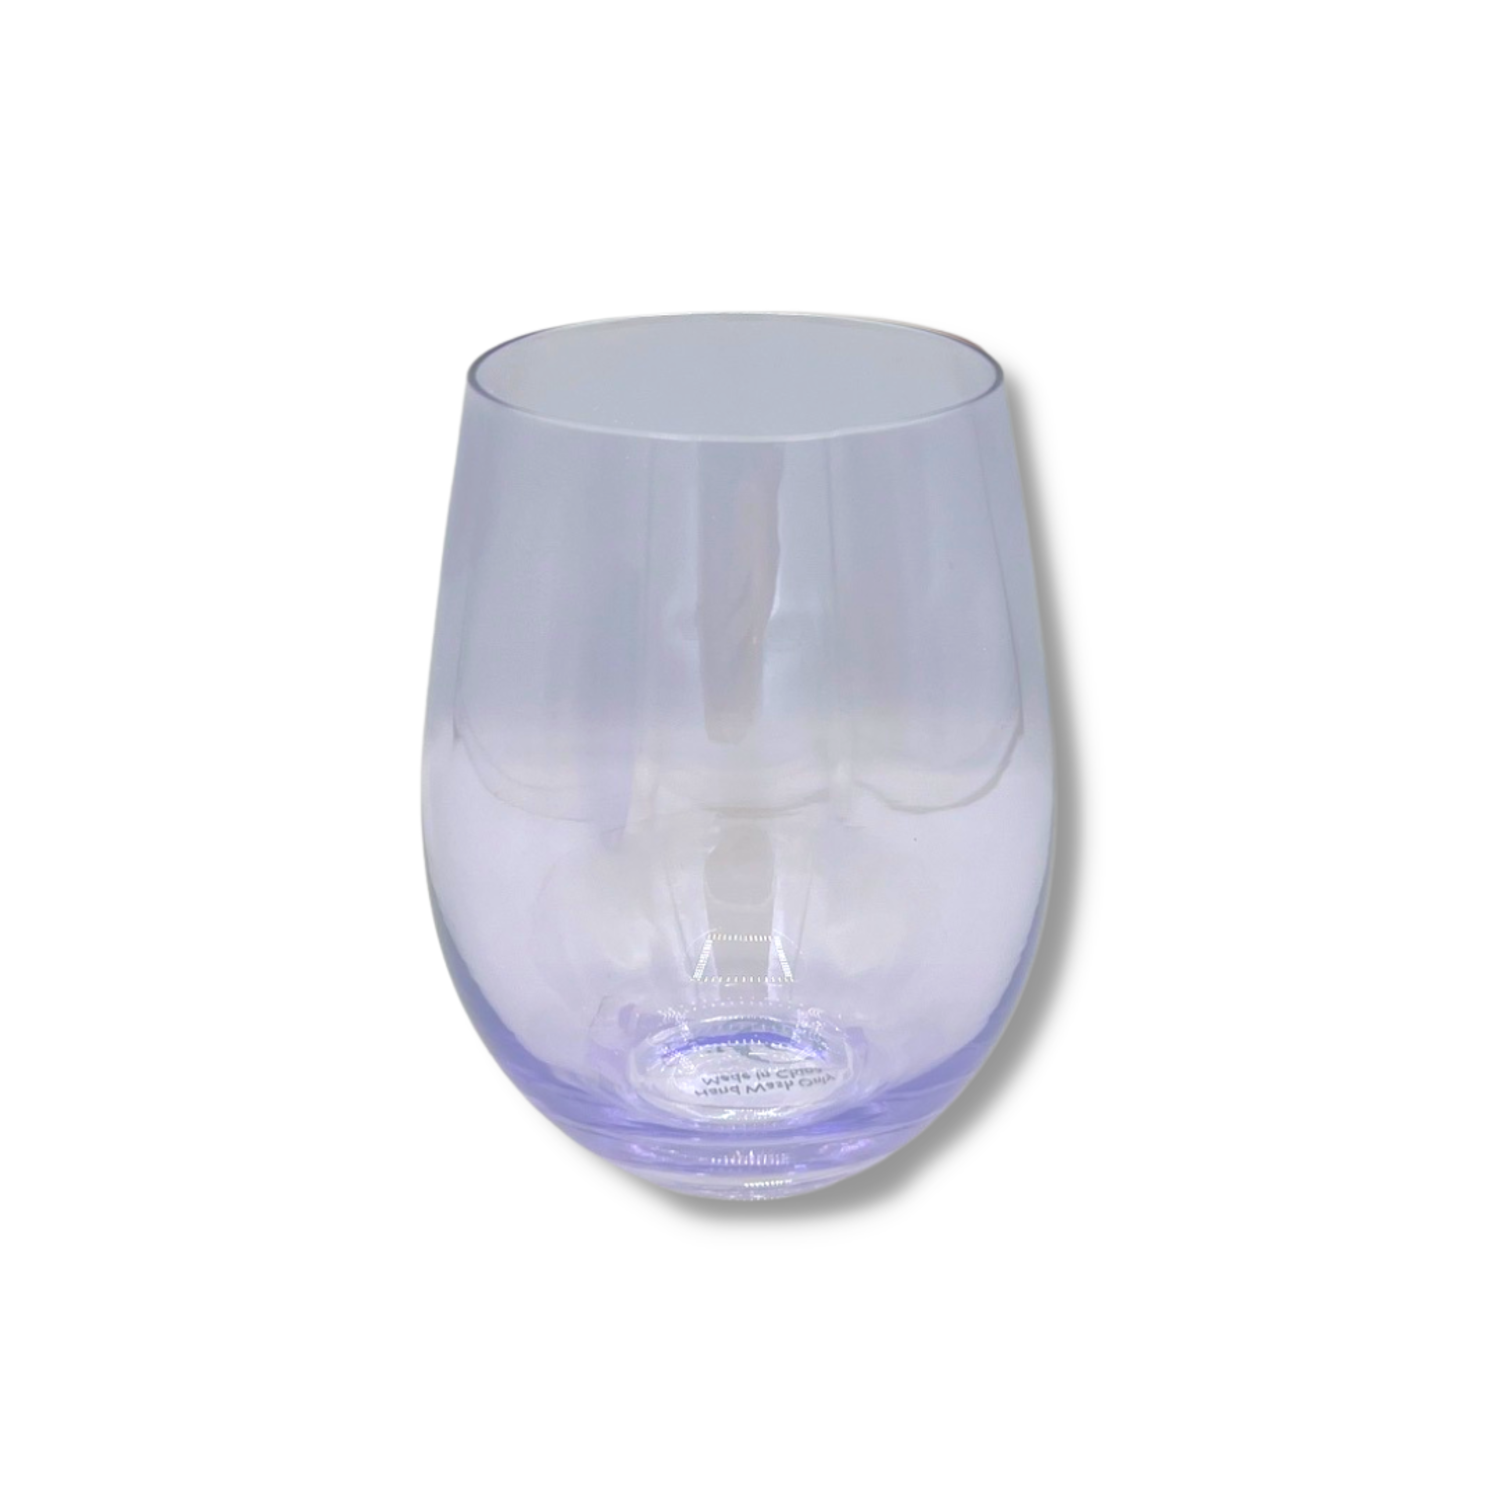 A Fish Acrylic Stemless Wine Glass - The Admiralty